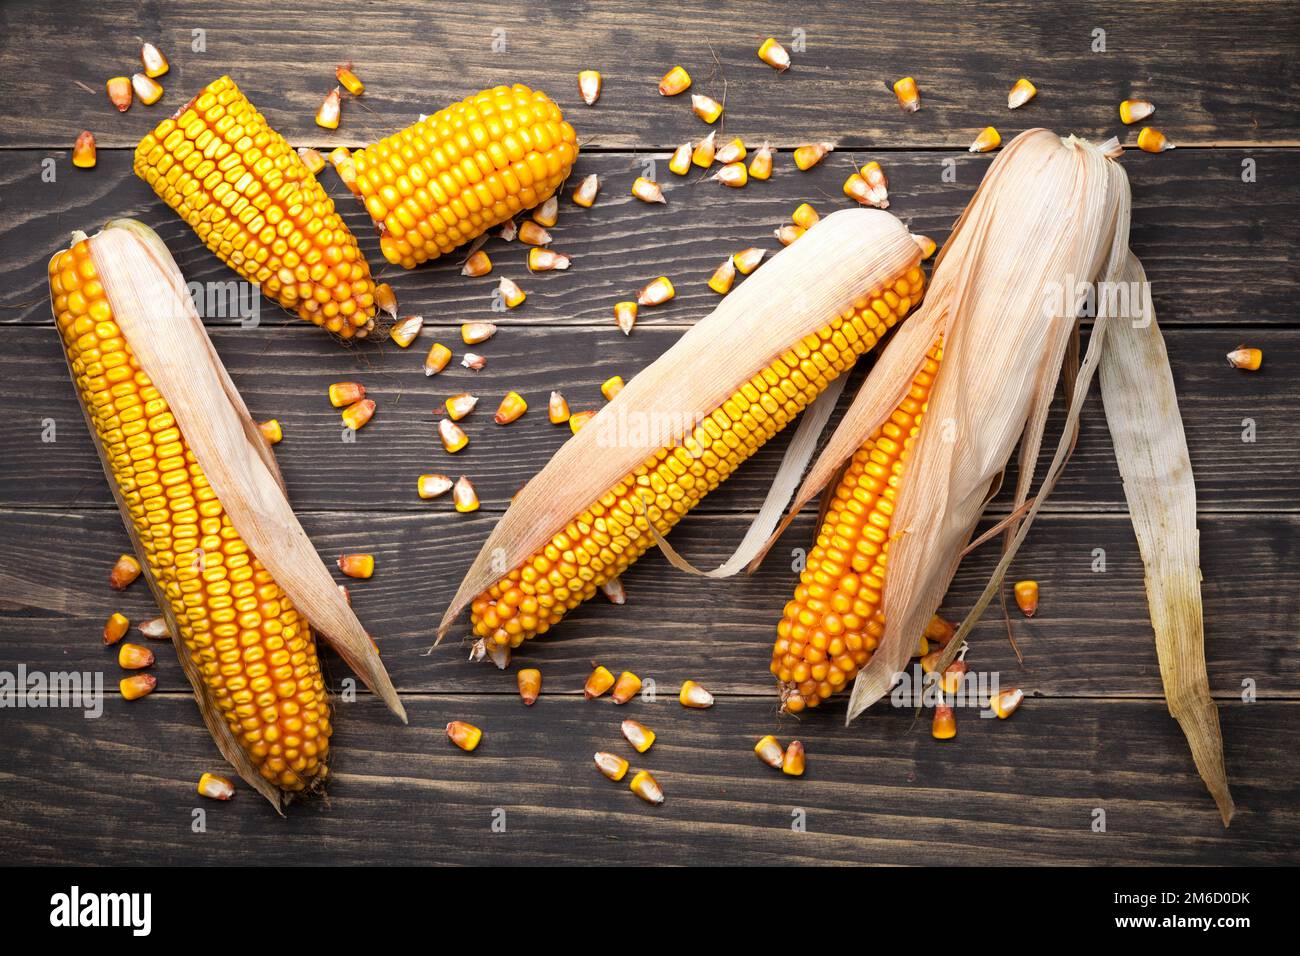 Corn Cobs And Seeds On Wooden Table Stock Photo